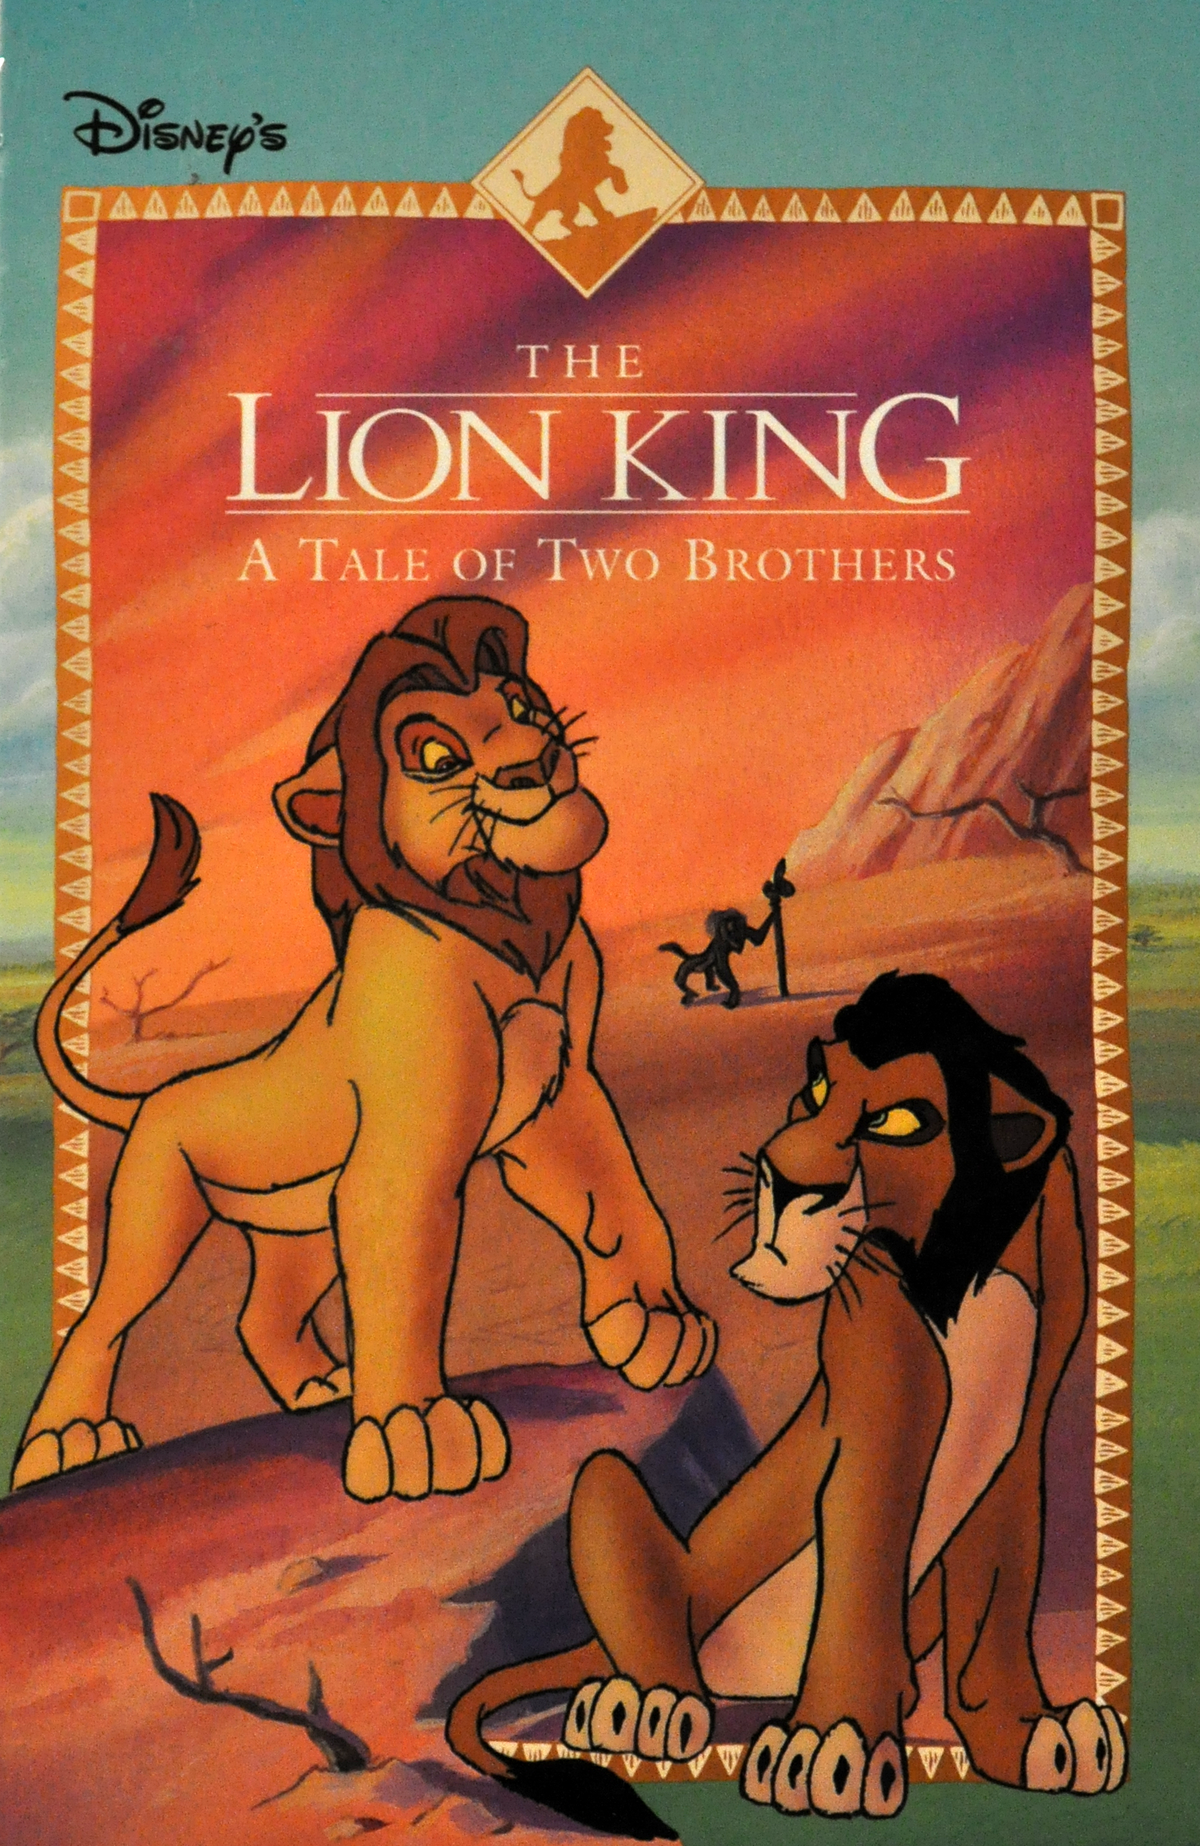 I have a feeling their story will unfold similarly to Lion King 2